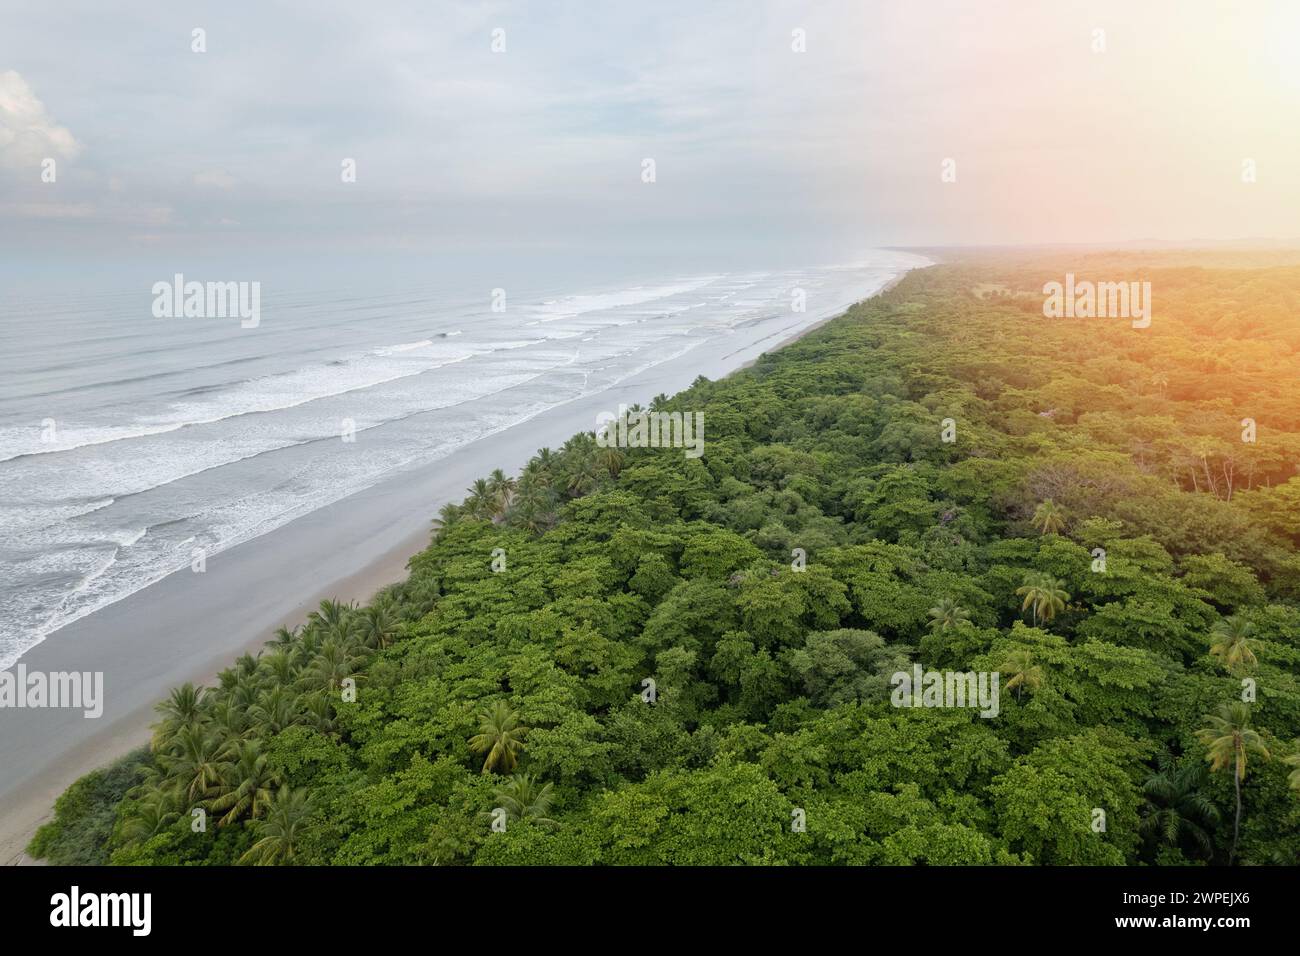 Jungle forest next to coastline aerial drone view Stock Photo